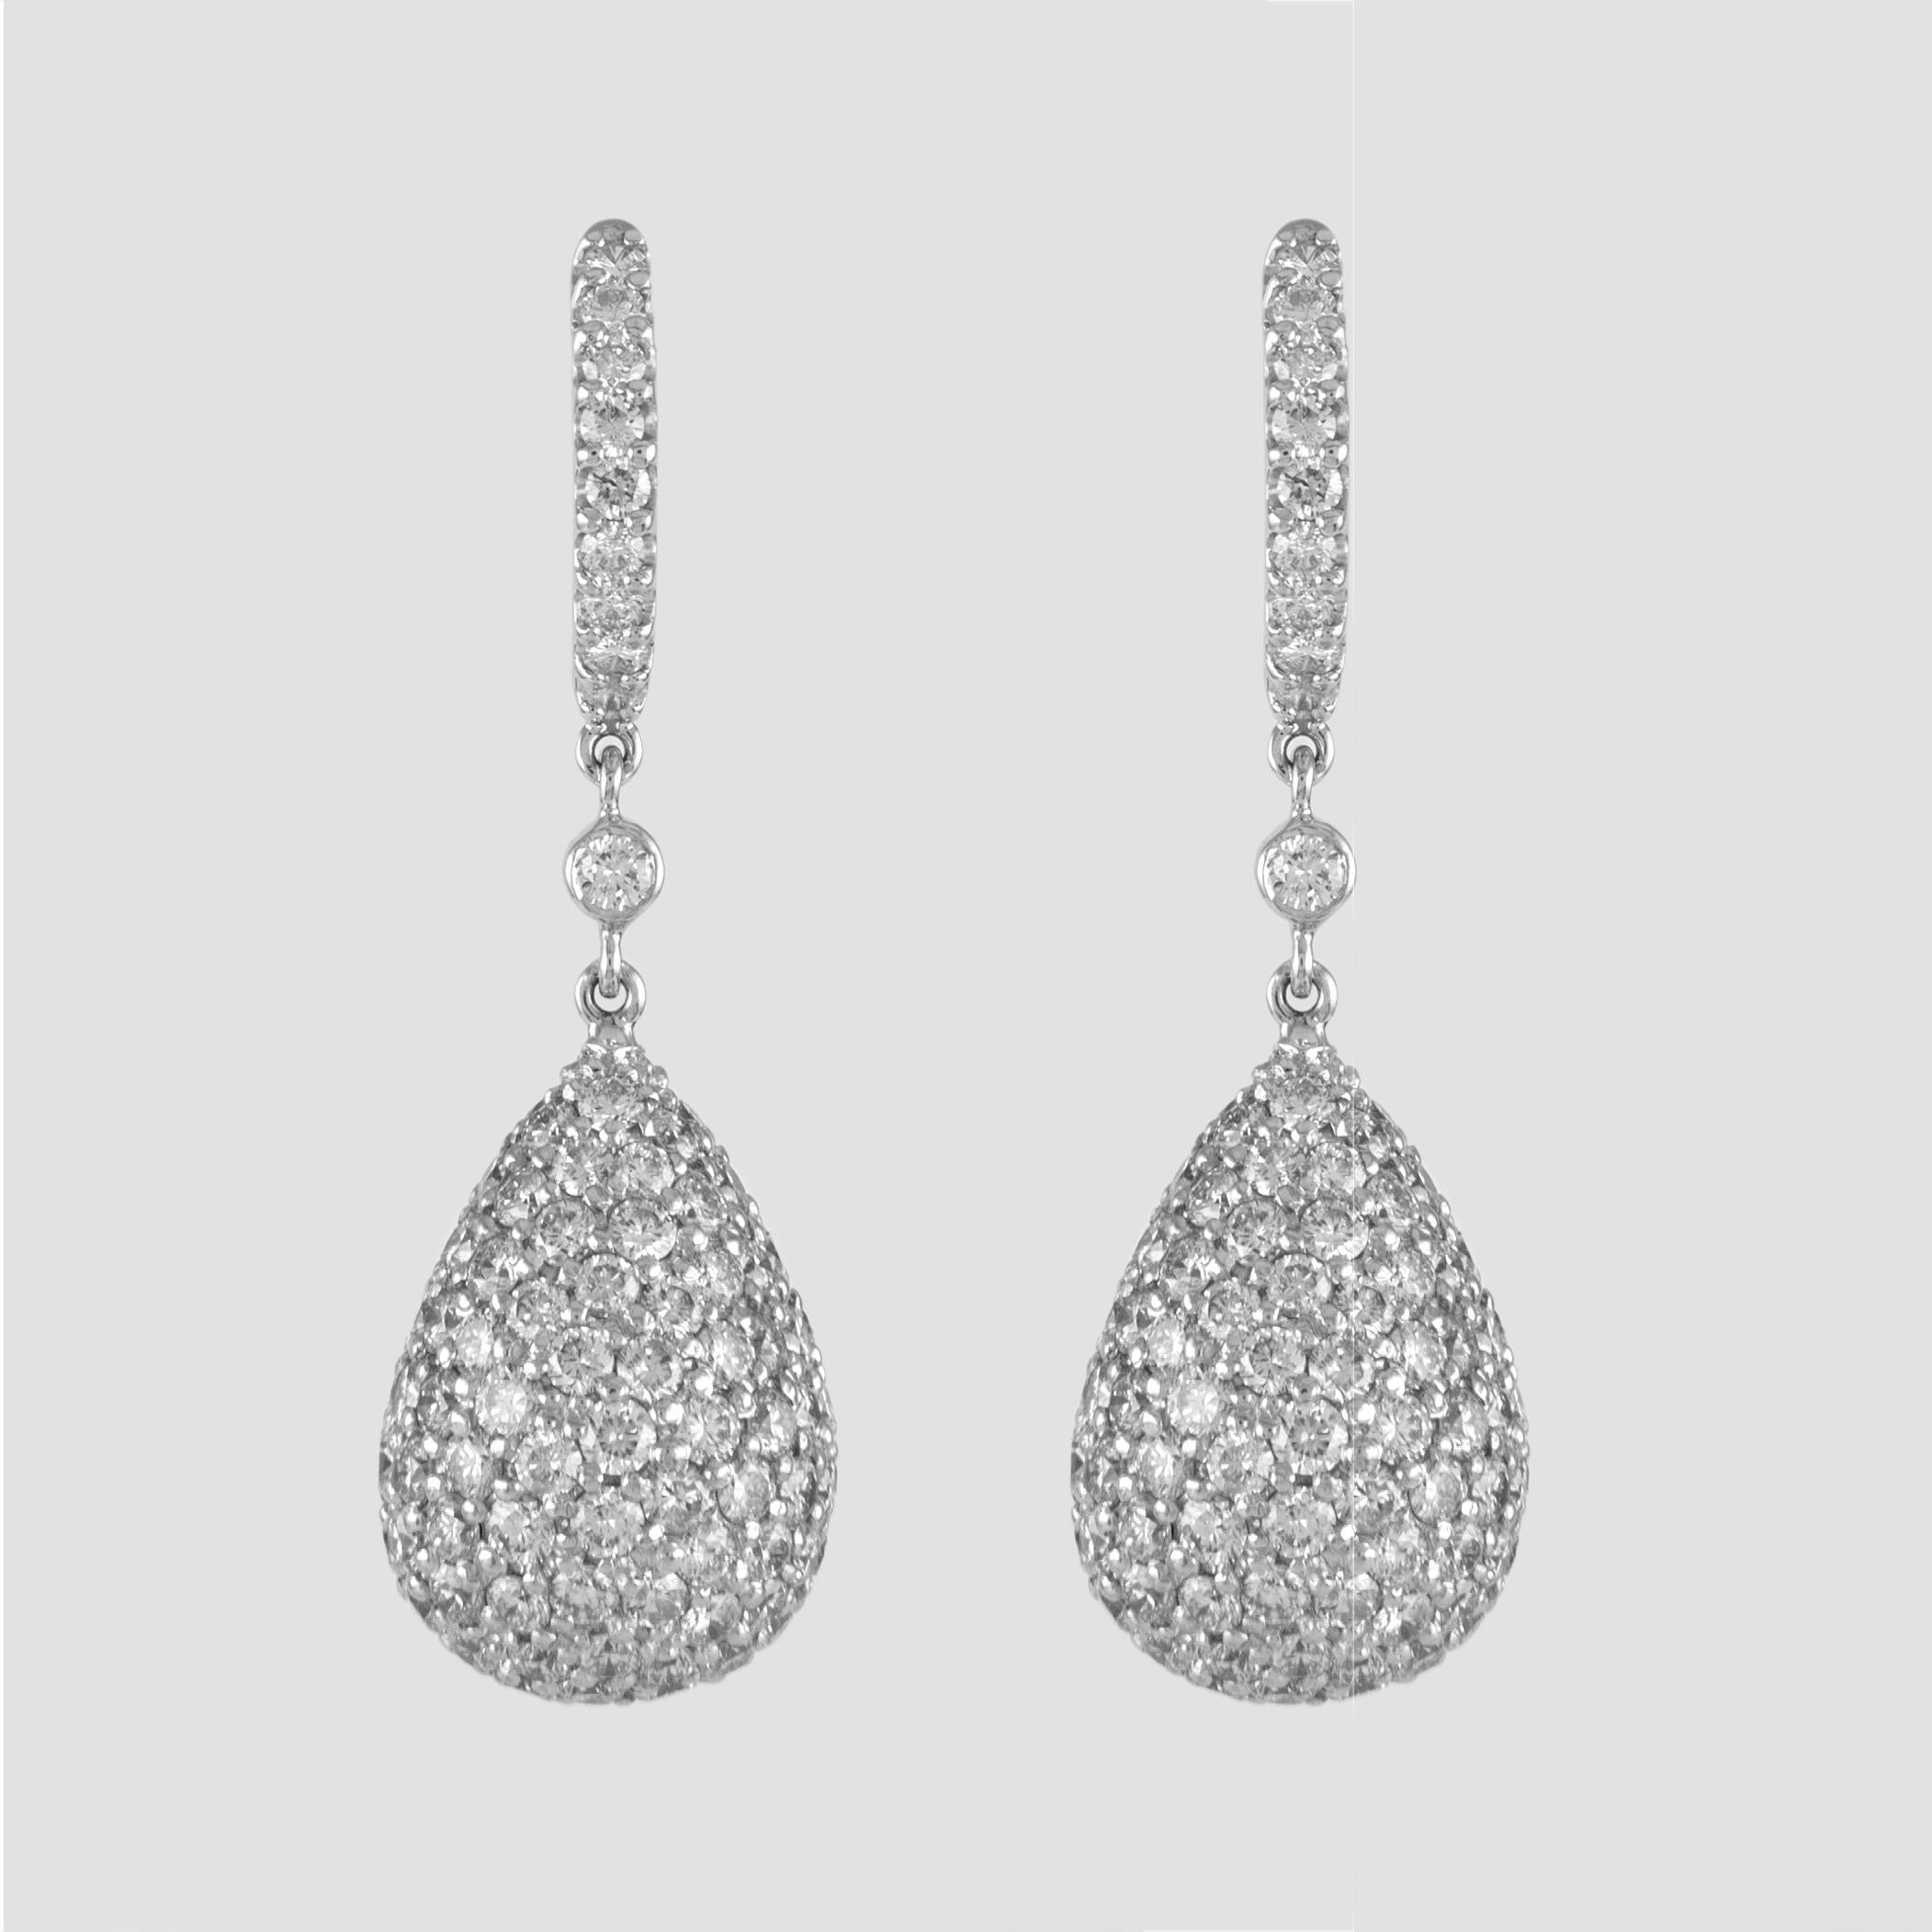 Round Cut 9.50ct Diamond Domed Pear Pave Earrings 18k White Gold